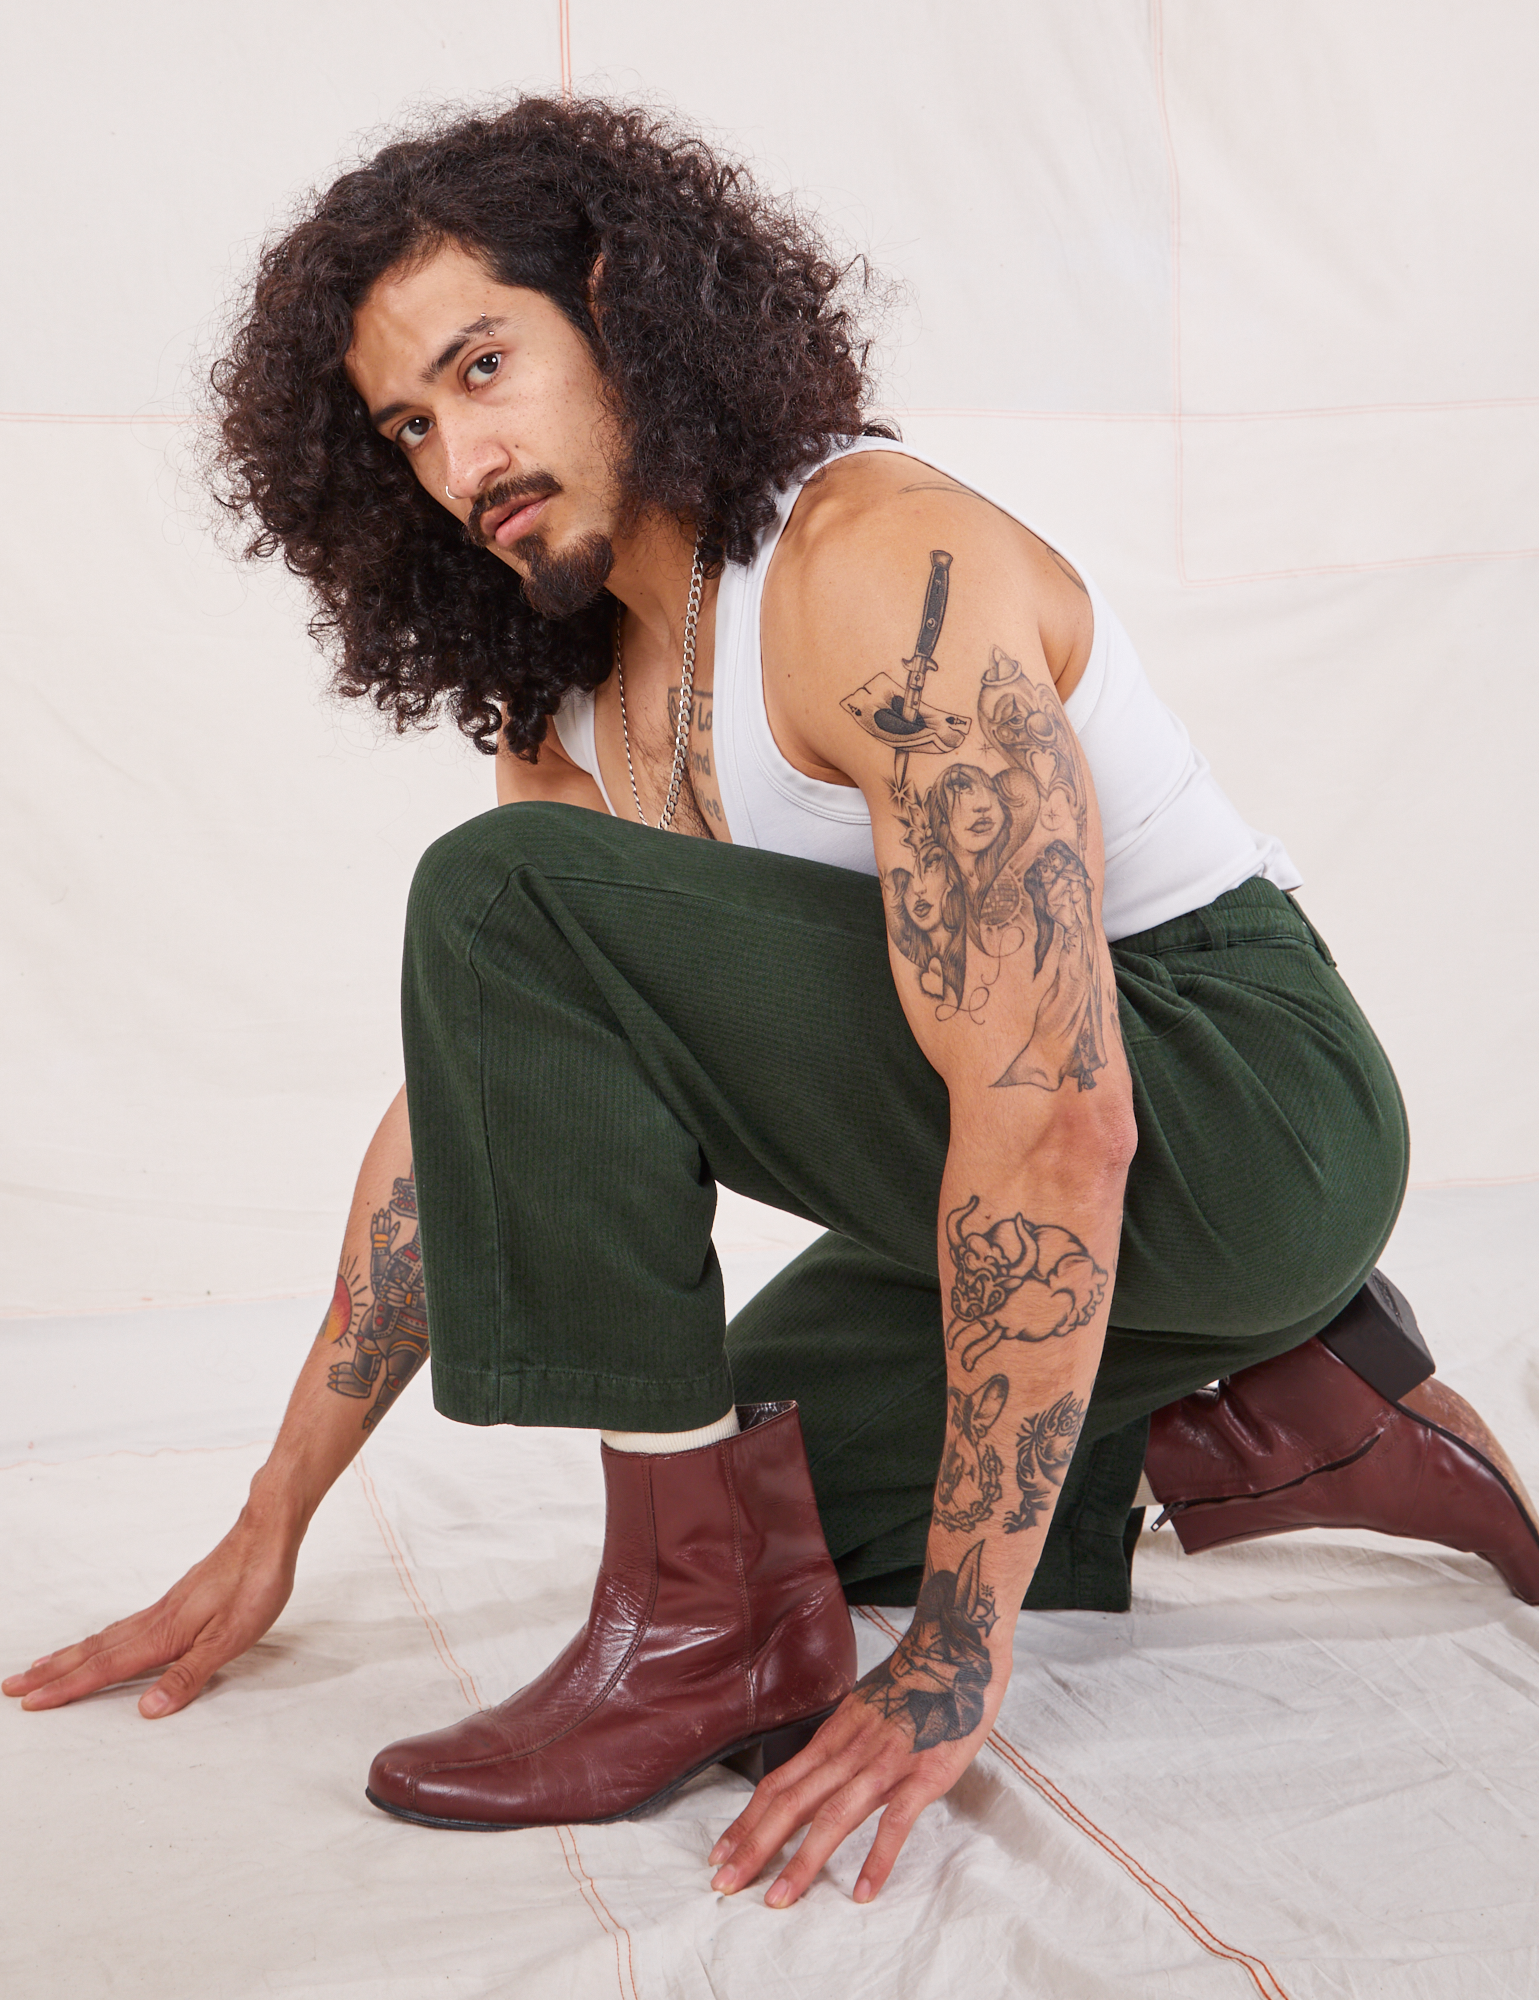 Jesse is wearing Heritage Trousers in Swamp Green and vintage off-white Tank Top